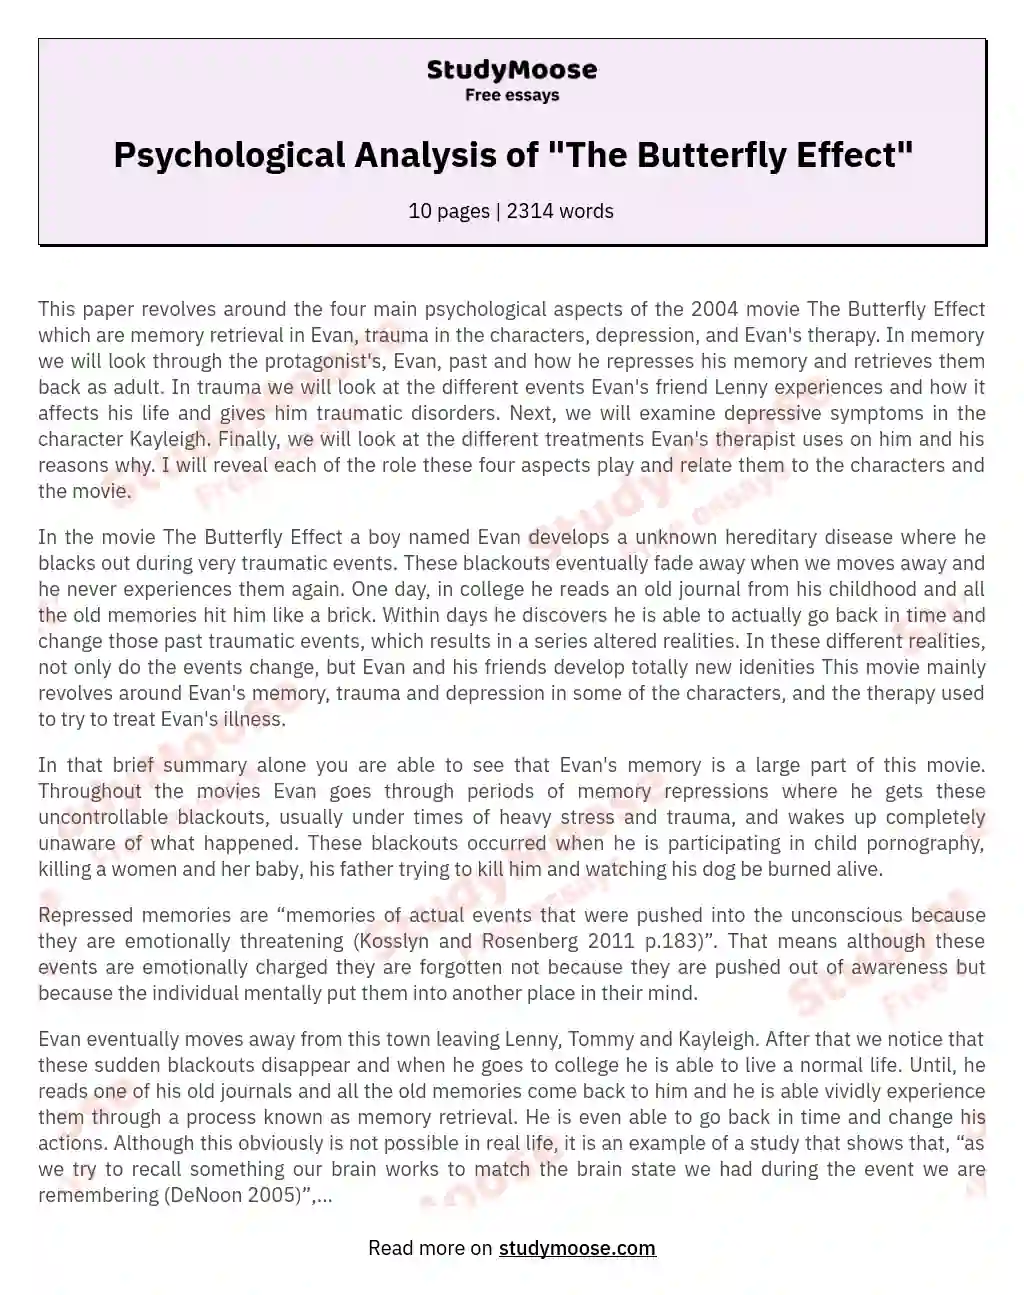 Psychological Analysis of "The Butterfly Effect" essay